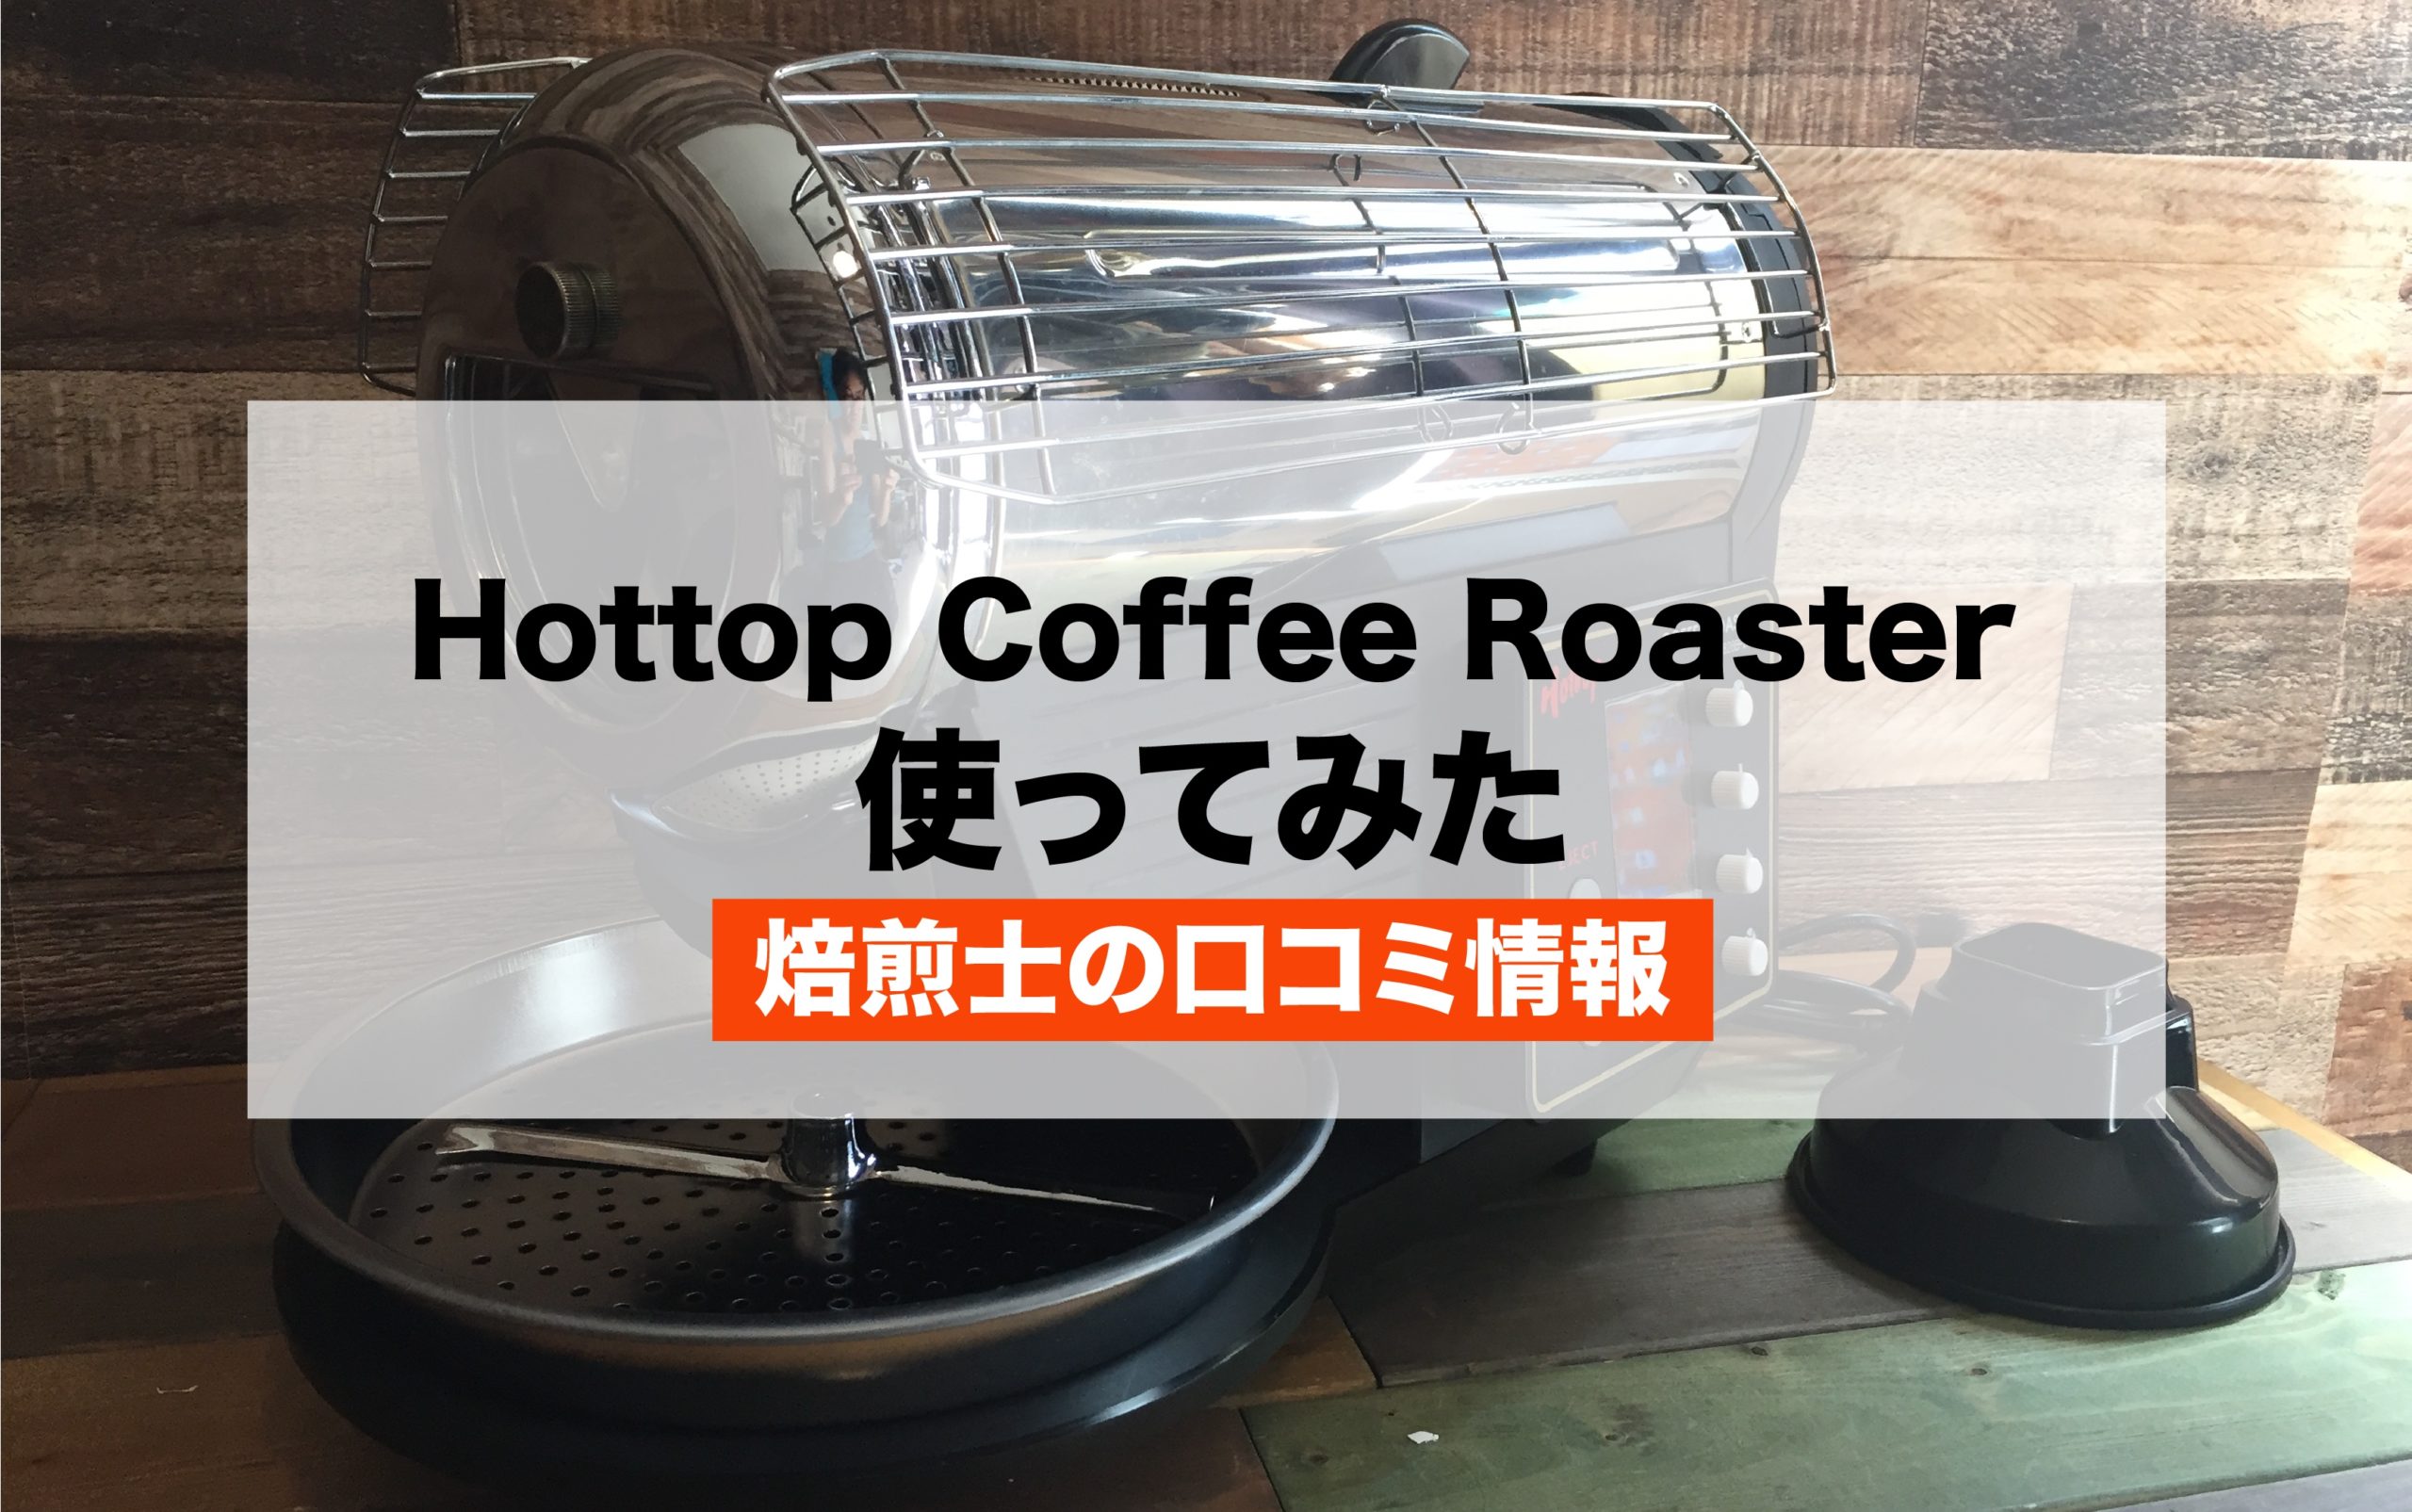 Hottop Coffee Roaster｜AFRO BLOG | アフロの焙煎屋のコーヒー焙煎